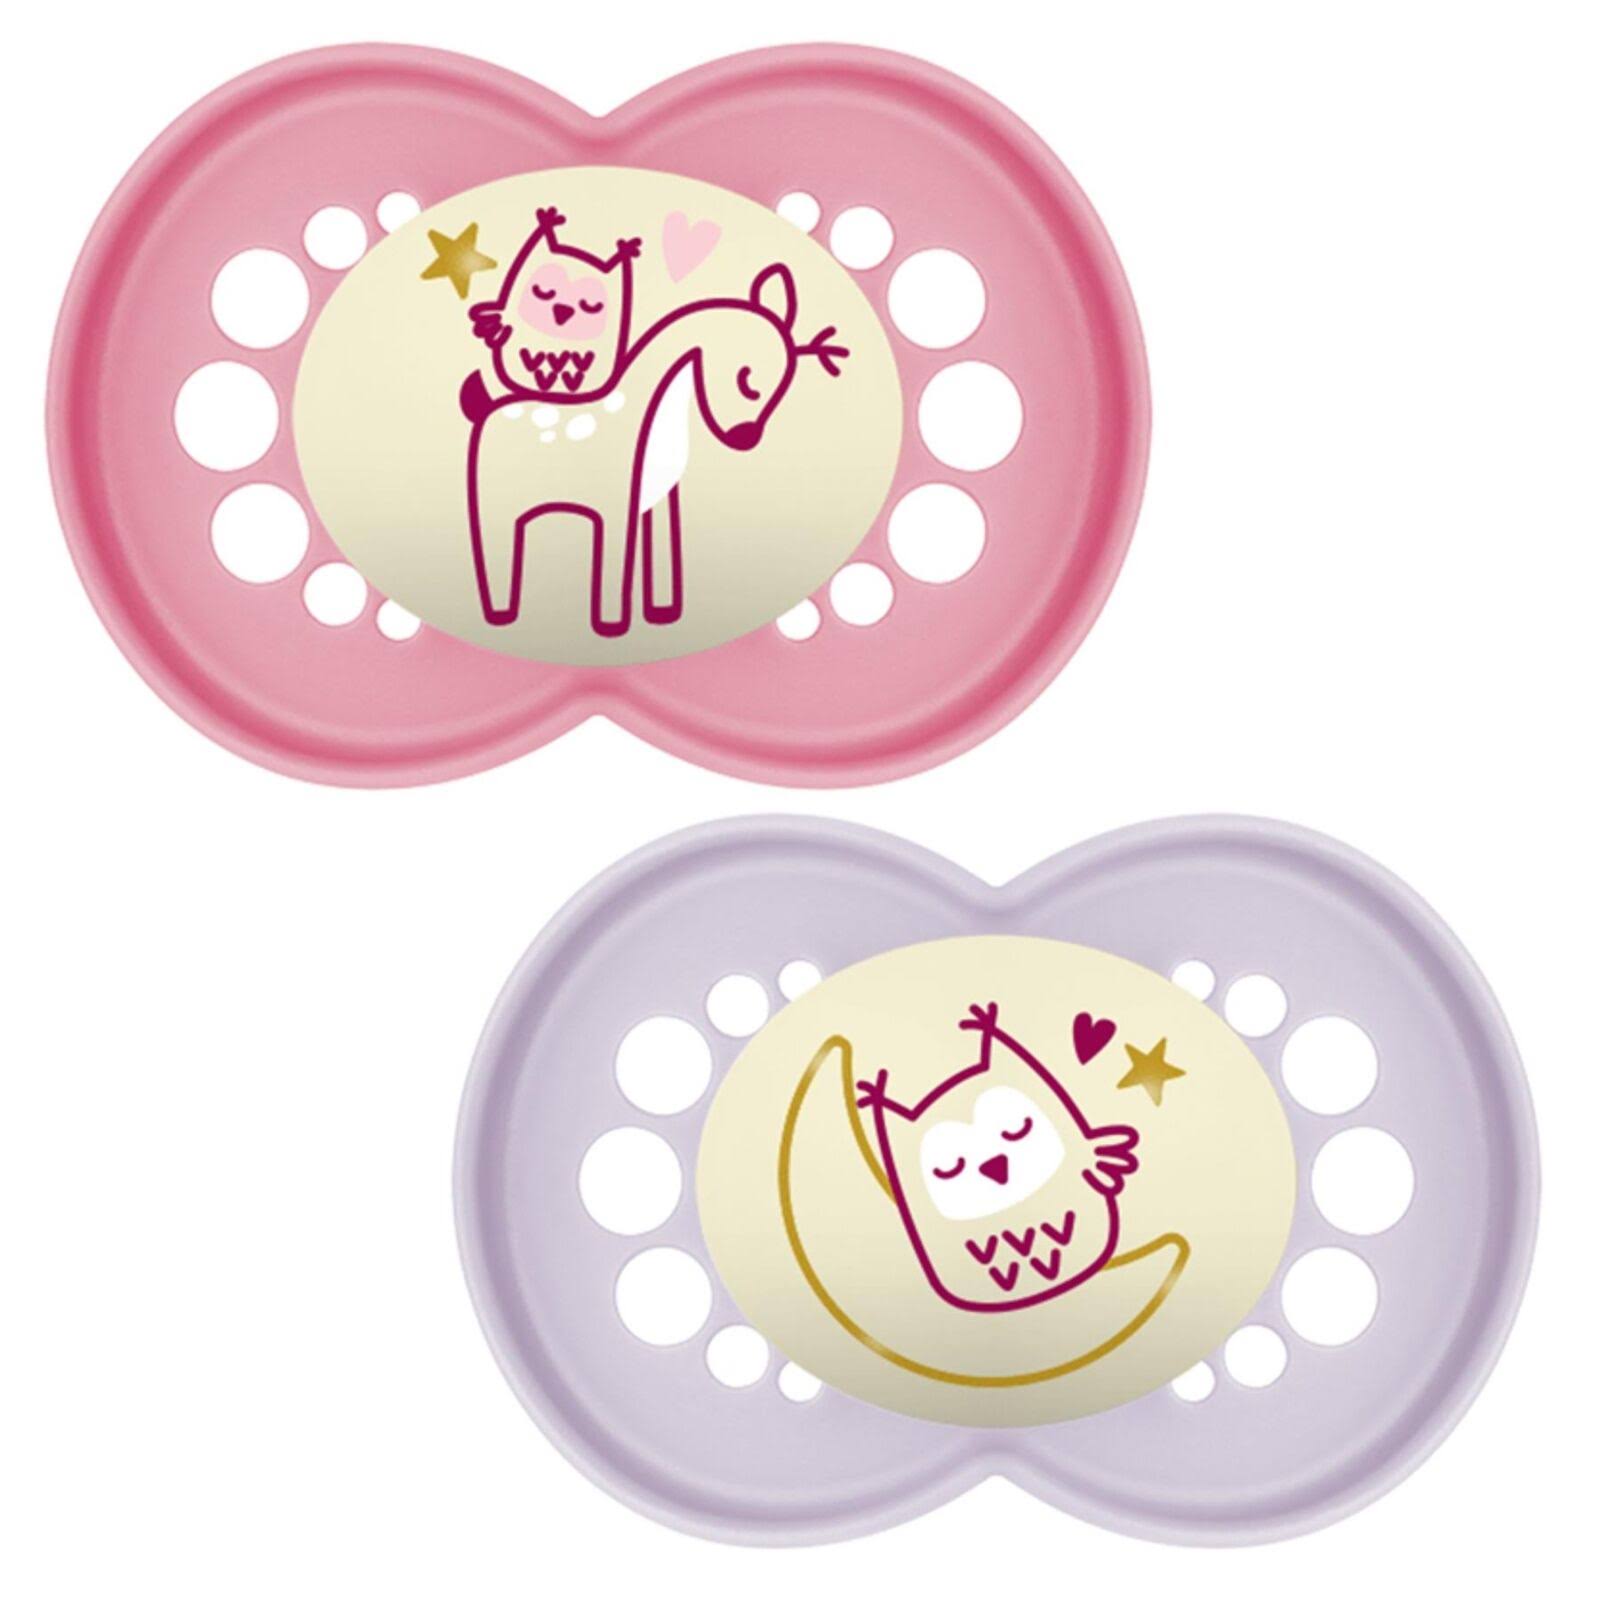 MAM Pure Night Soother Pink 16M+ 2pk